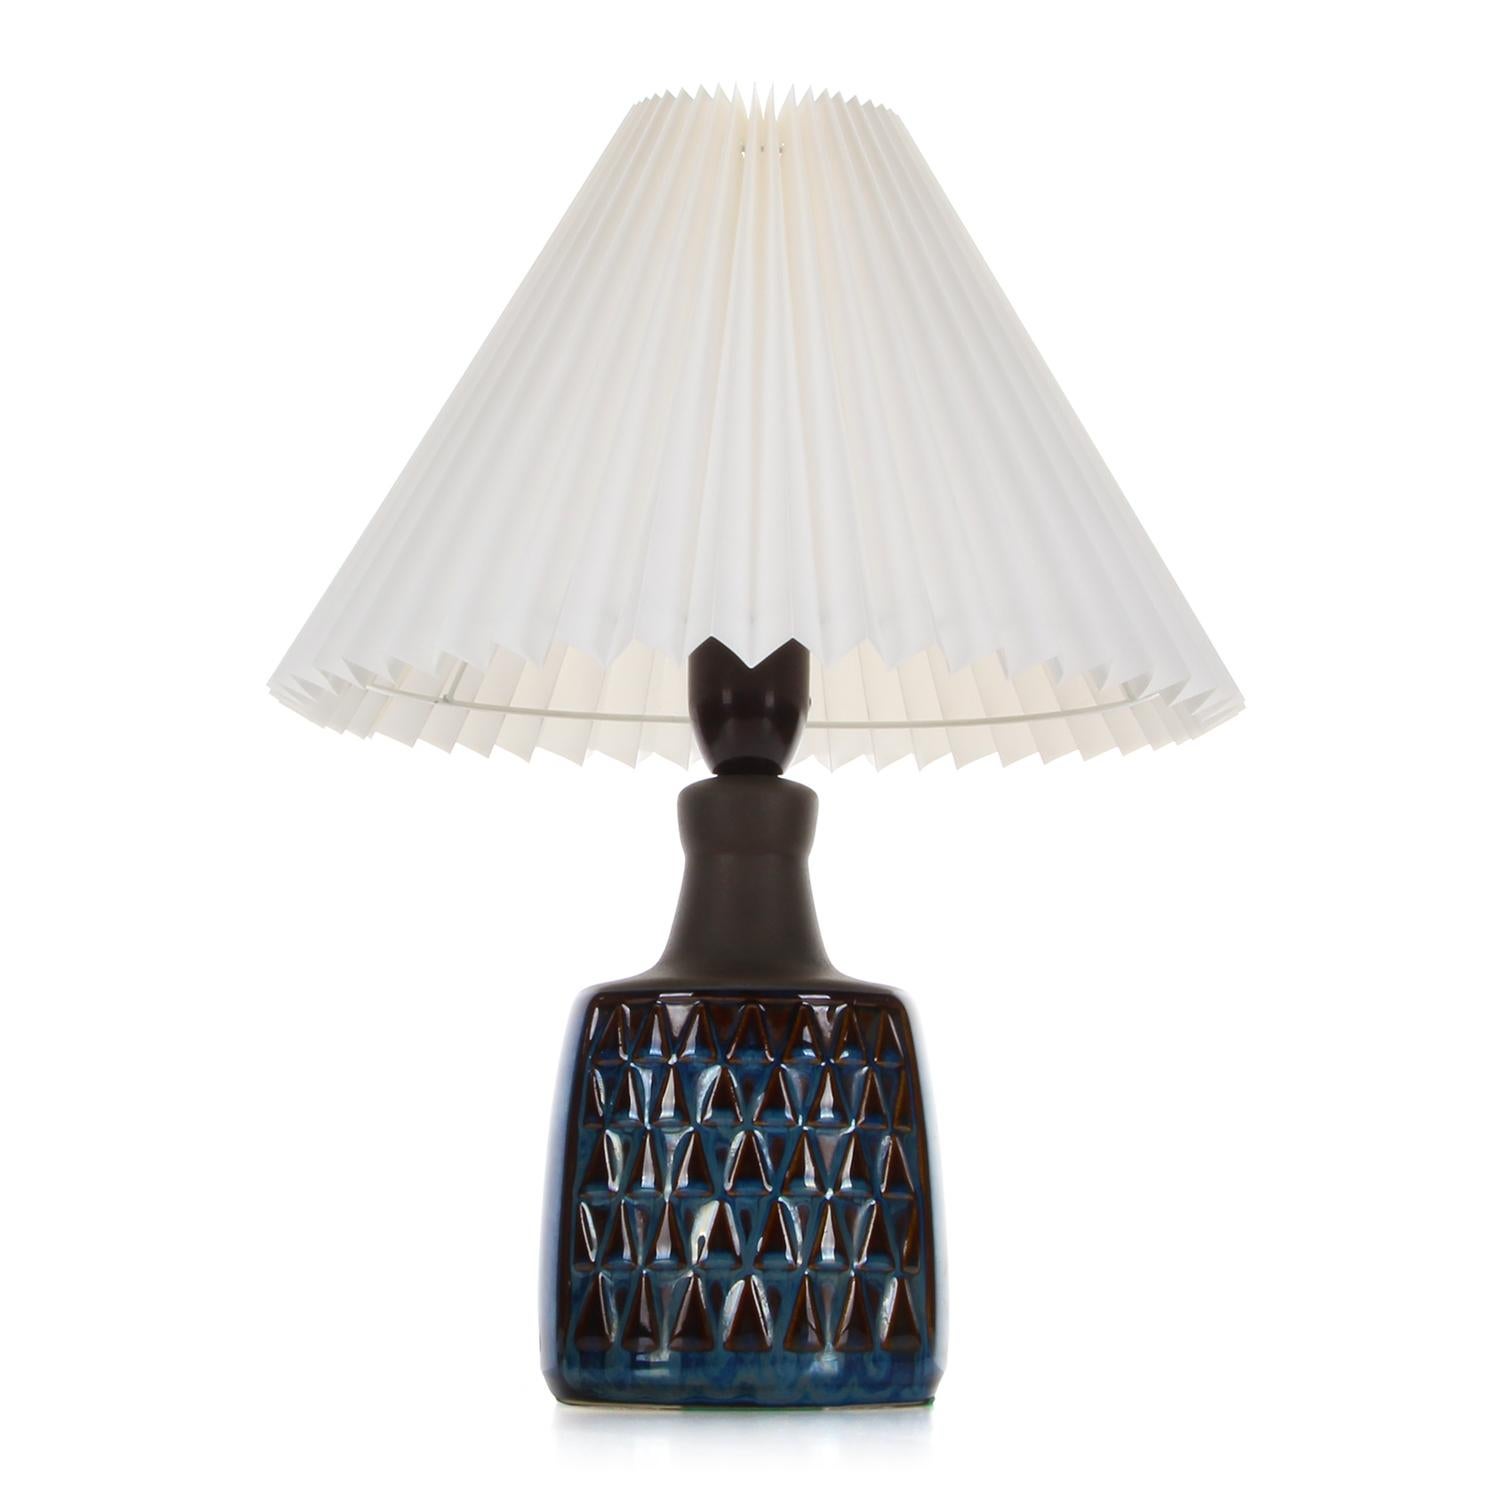 Scandinavian Modern Blue Table Lamp by Einar Johansen Soholm 1960s, with Vintage Shade Included